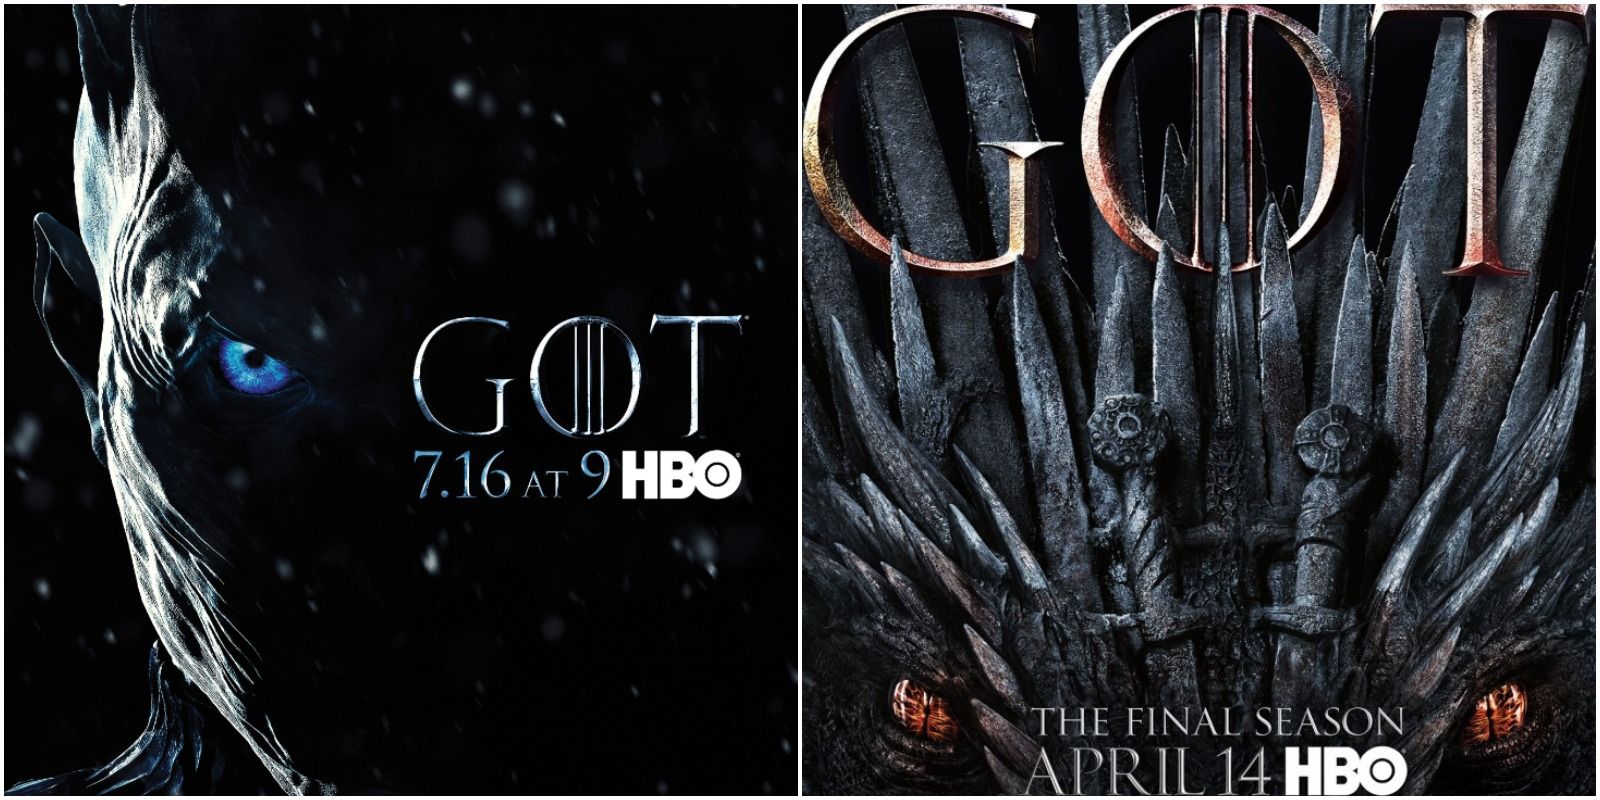 Teaser posters for Game of Thrones' seasons seven and eight, respectively